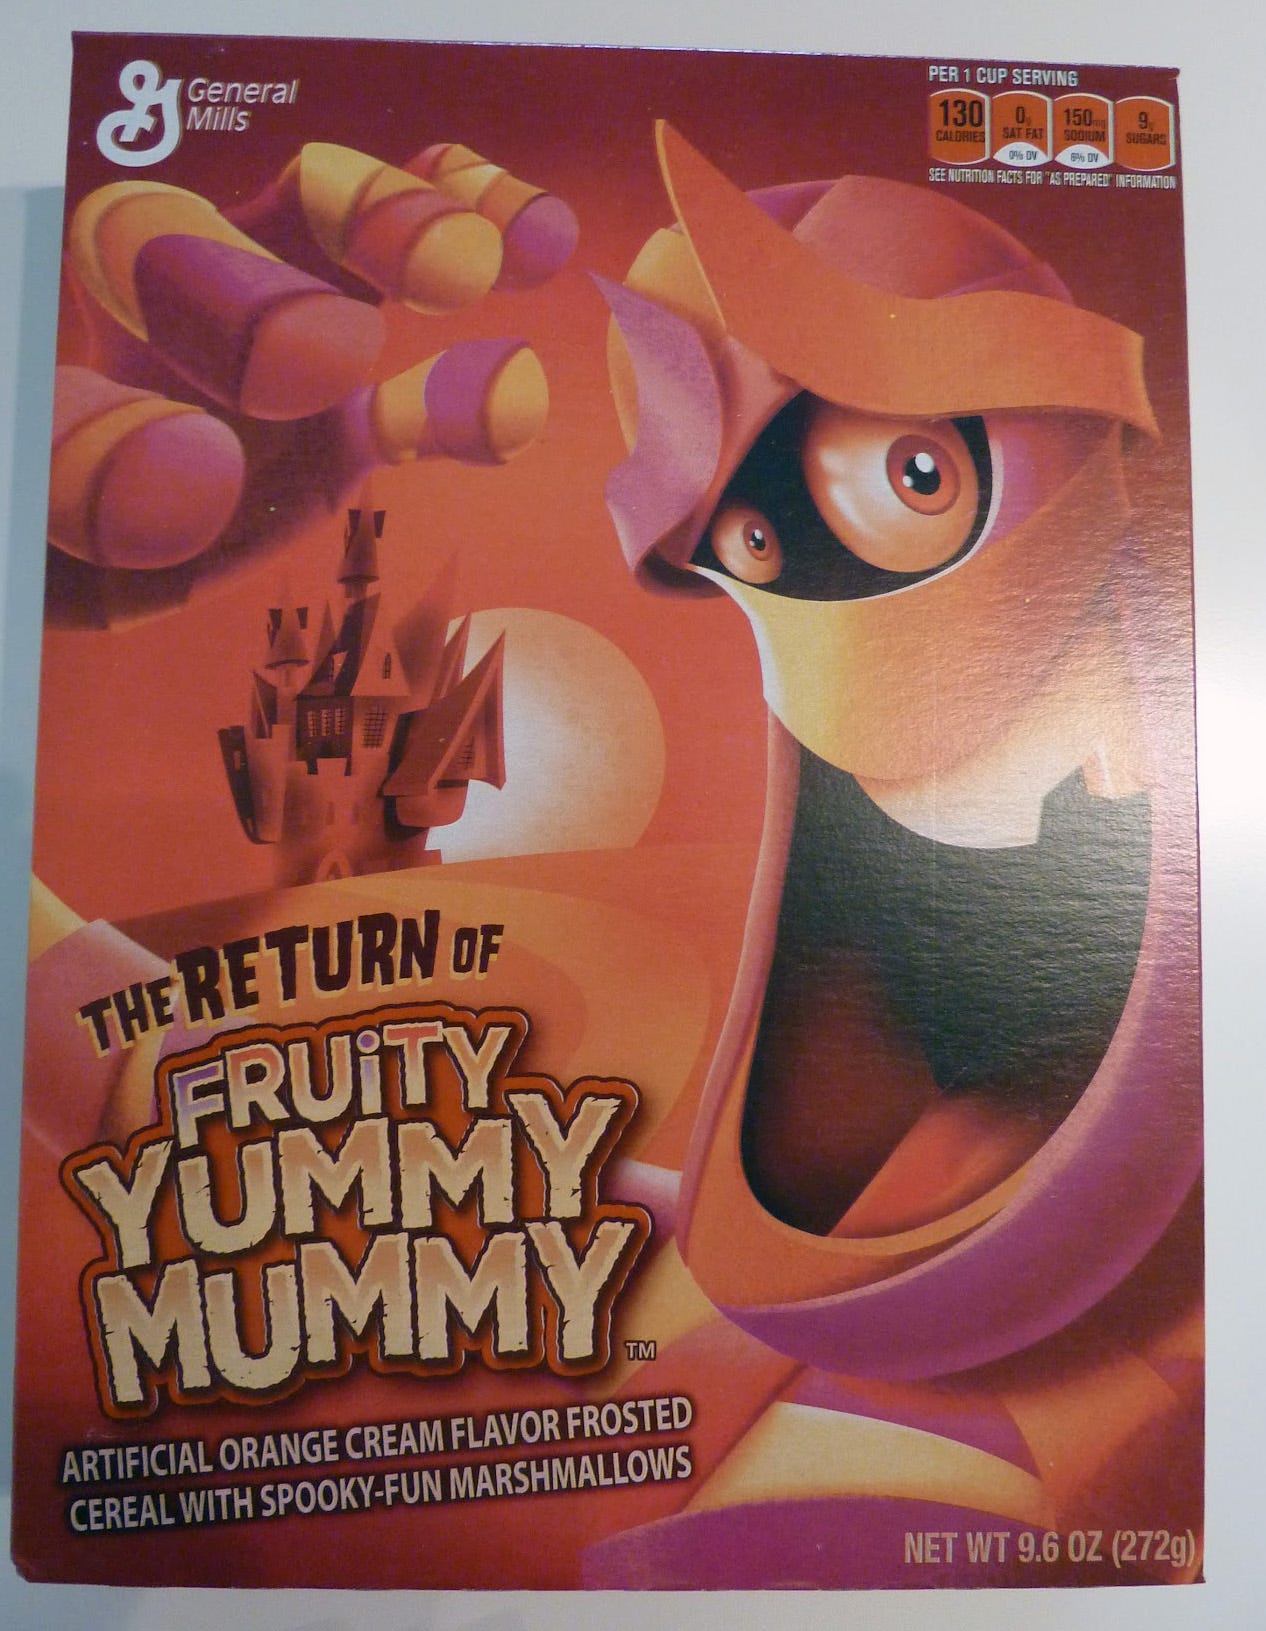 A History of Yummy Mummy Cereal - The Retroist